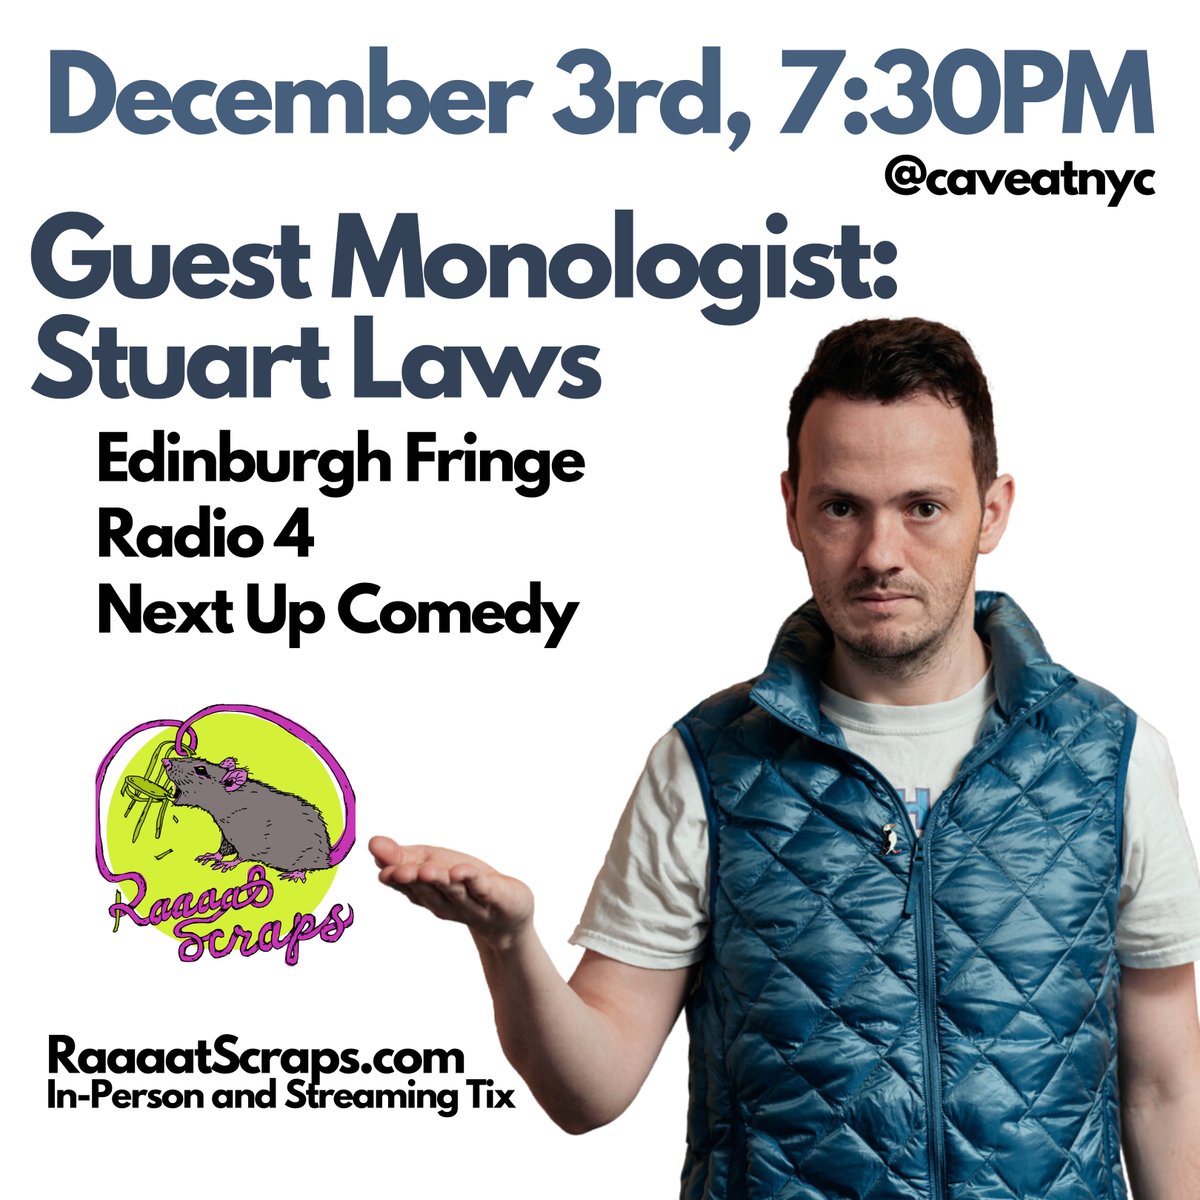 Sunday, December 3rd -we have Stuart Laws @thisstuartlaws A stellar stand-up, he has written for Radio 4, has two specials on NextUp Comedy & you can watch his latest special “Stuart Laws is All In” on 800 Pound Gorilla. Get your tickets! RaaaatScraps.com/shows